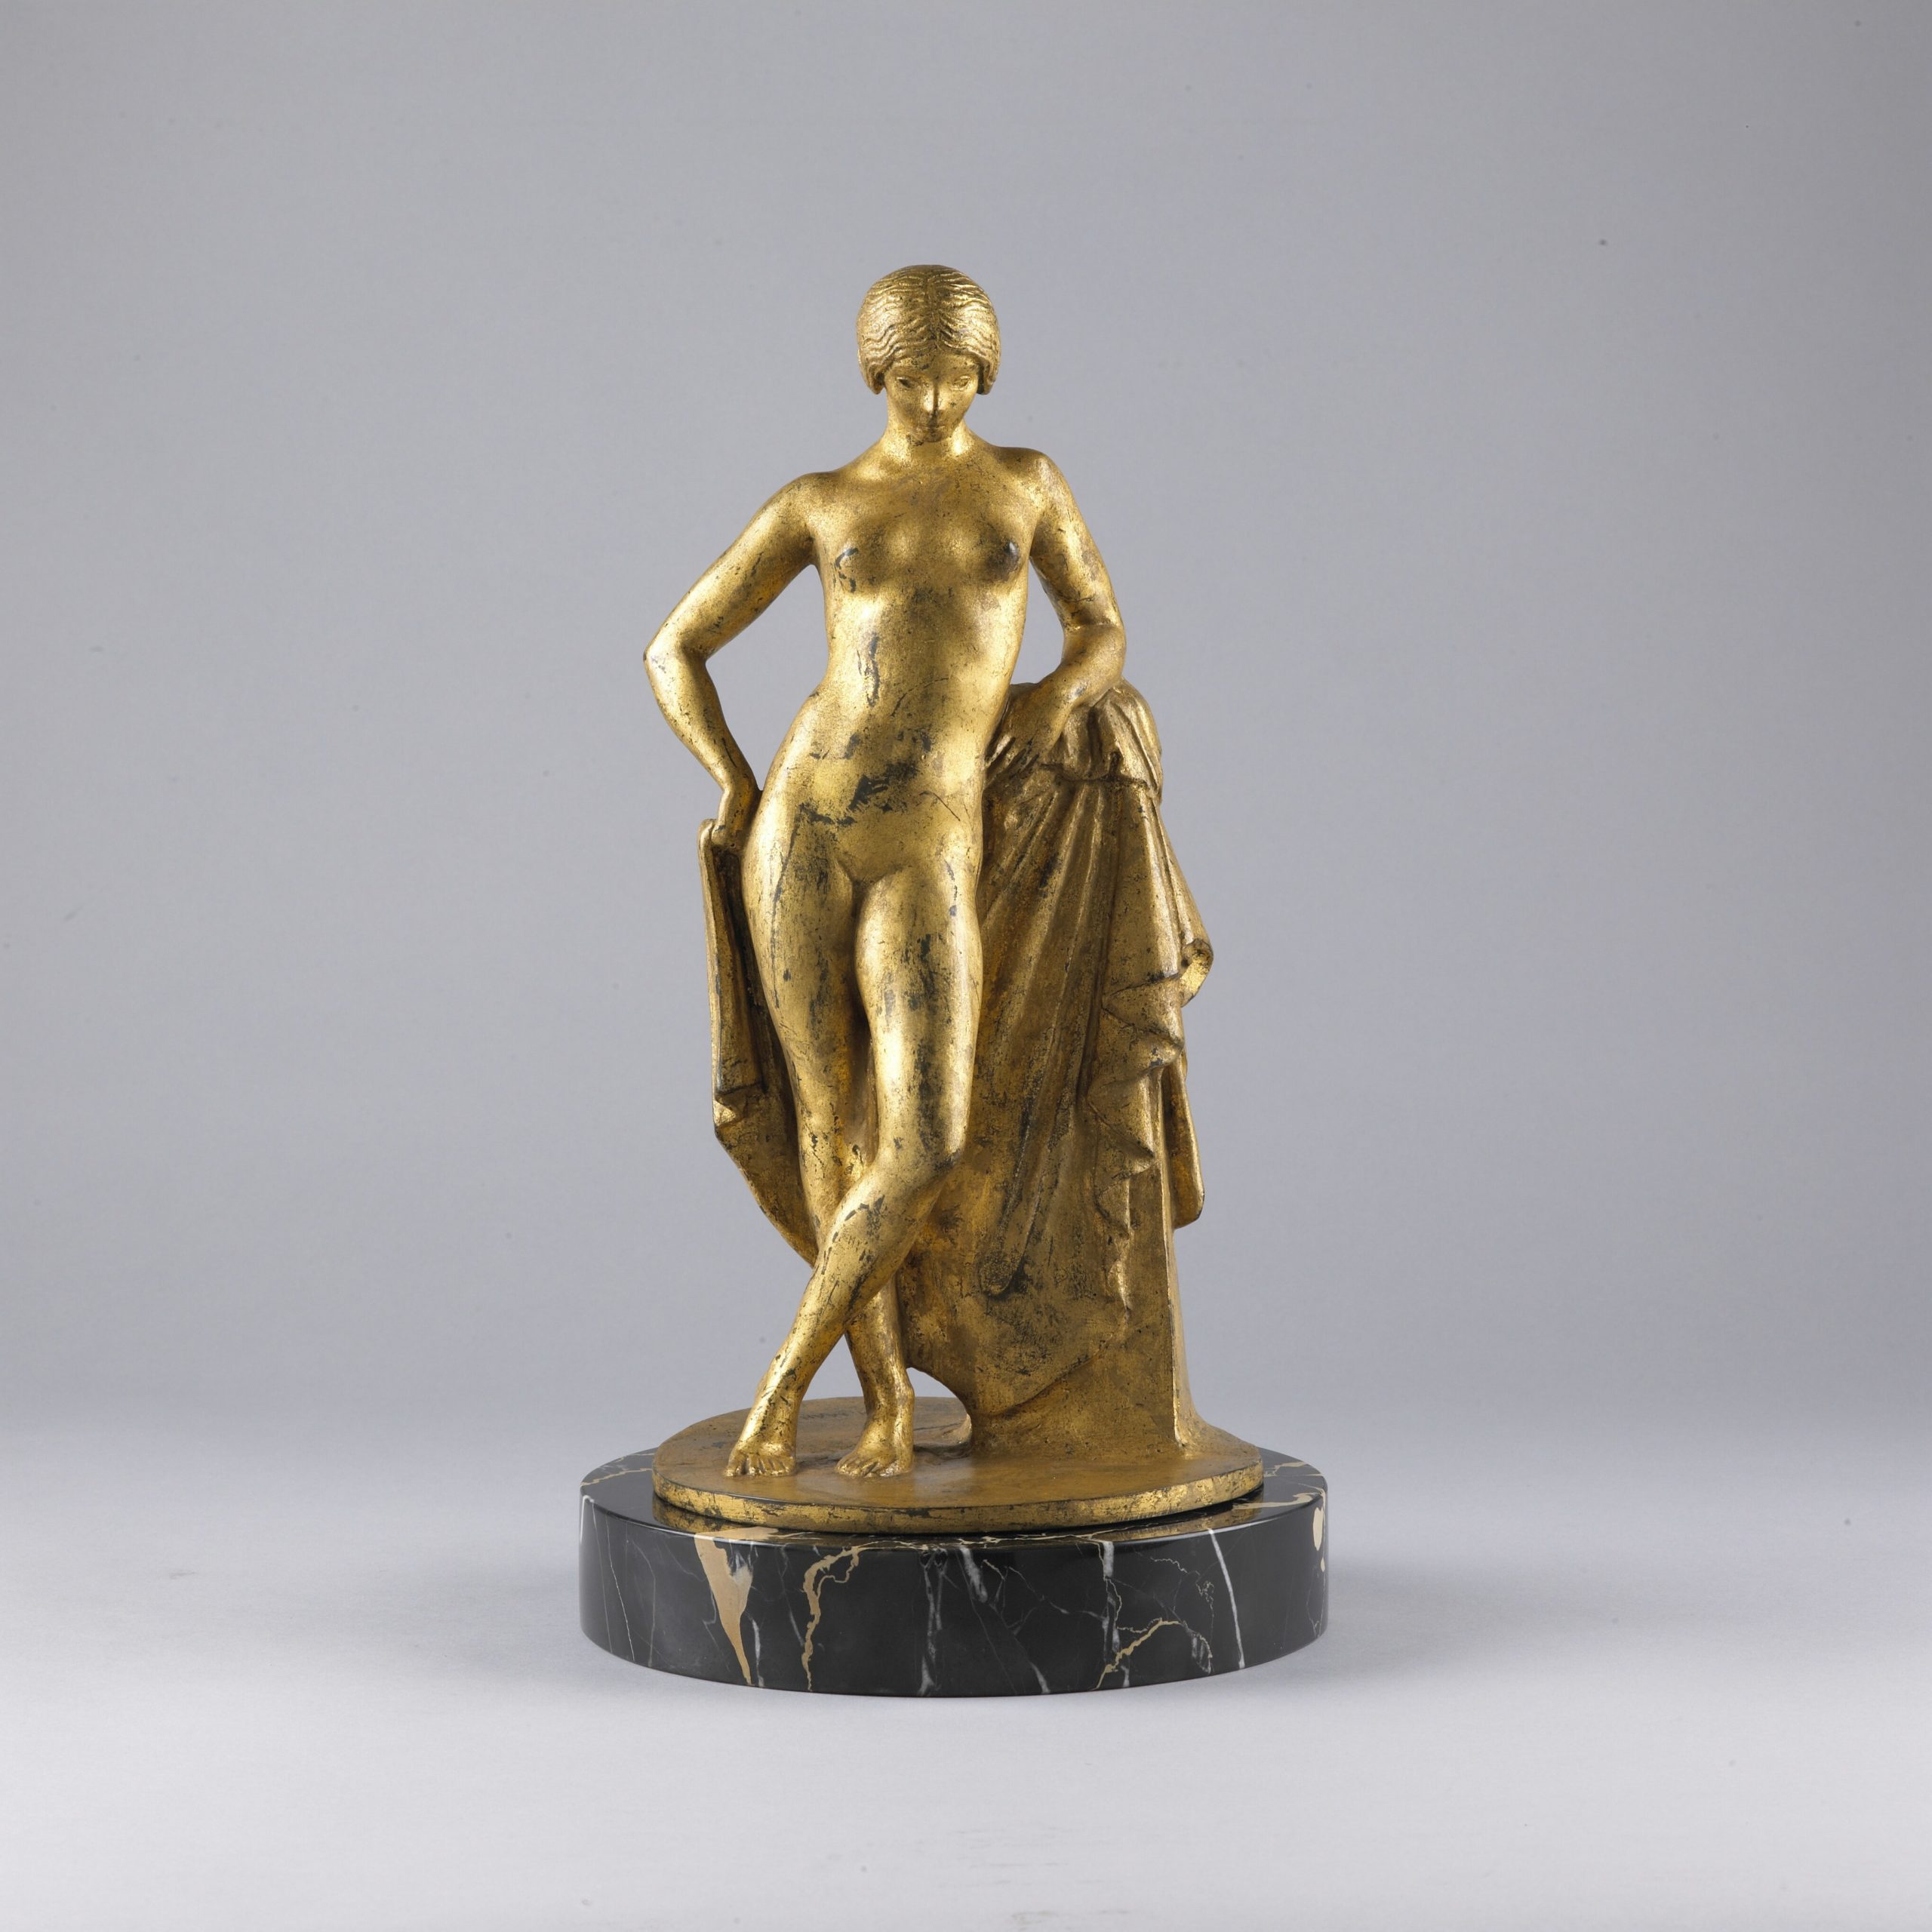 

											American Figurative  </b>

											<em>
												Now on view in New York</em> 

											<h4>
																							</h4>

		                																																													<i>Paul Howard Manship,</i>  
																																								Marietta (Young Minerva), 1911, 
																																								Gilt bronze, 
																																								13 inches 
																								
		                				